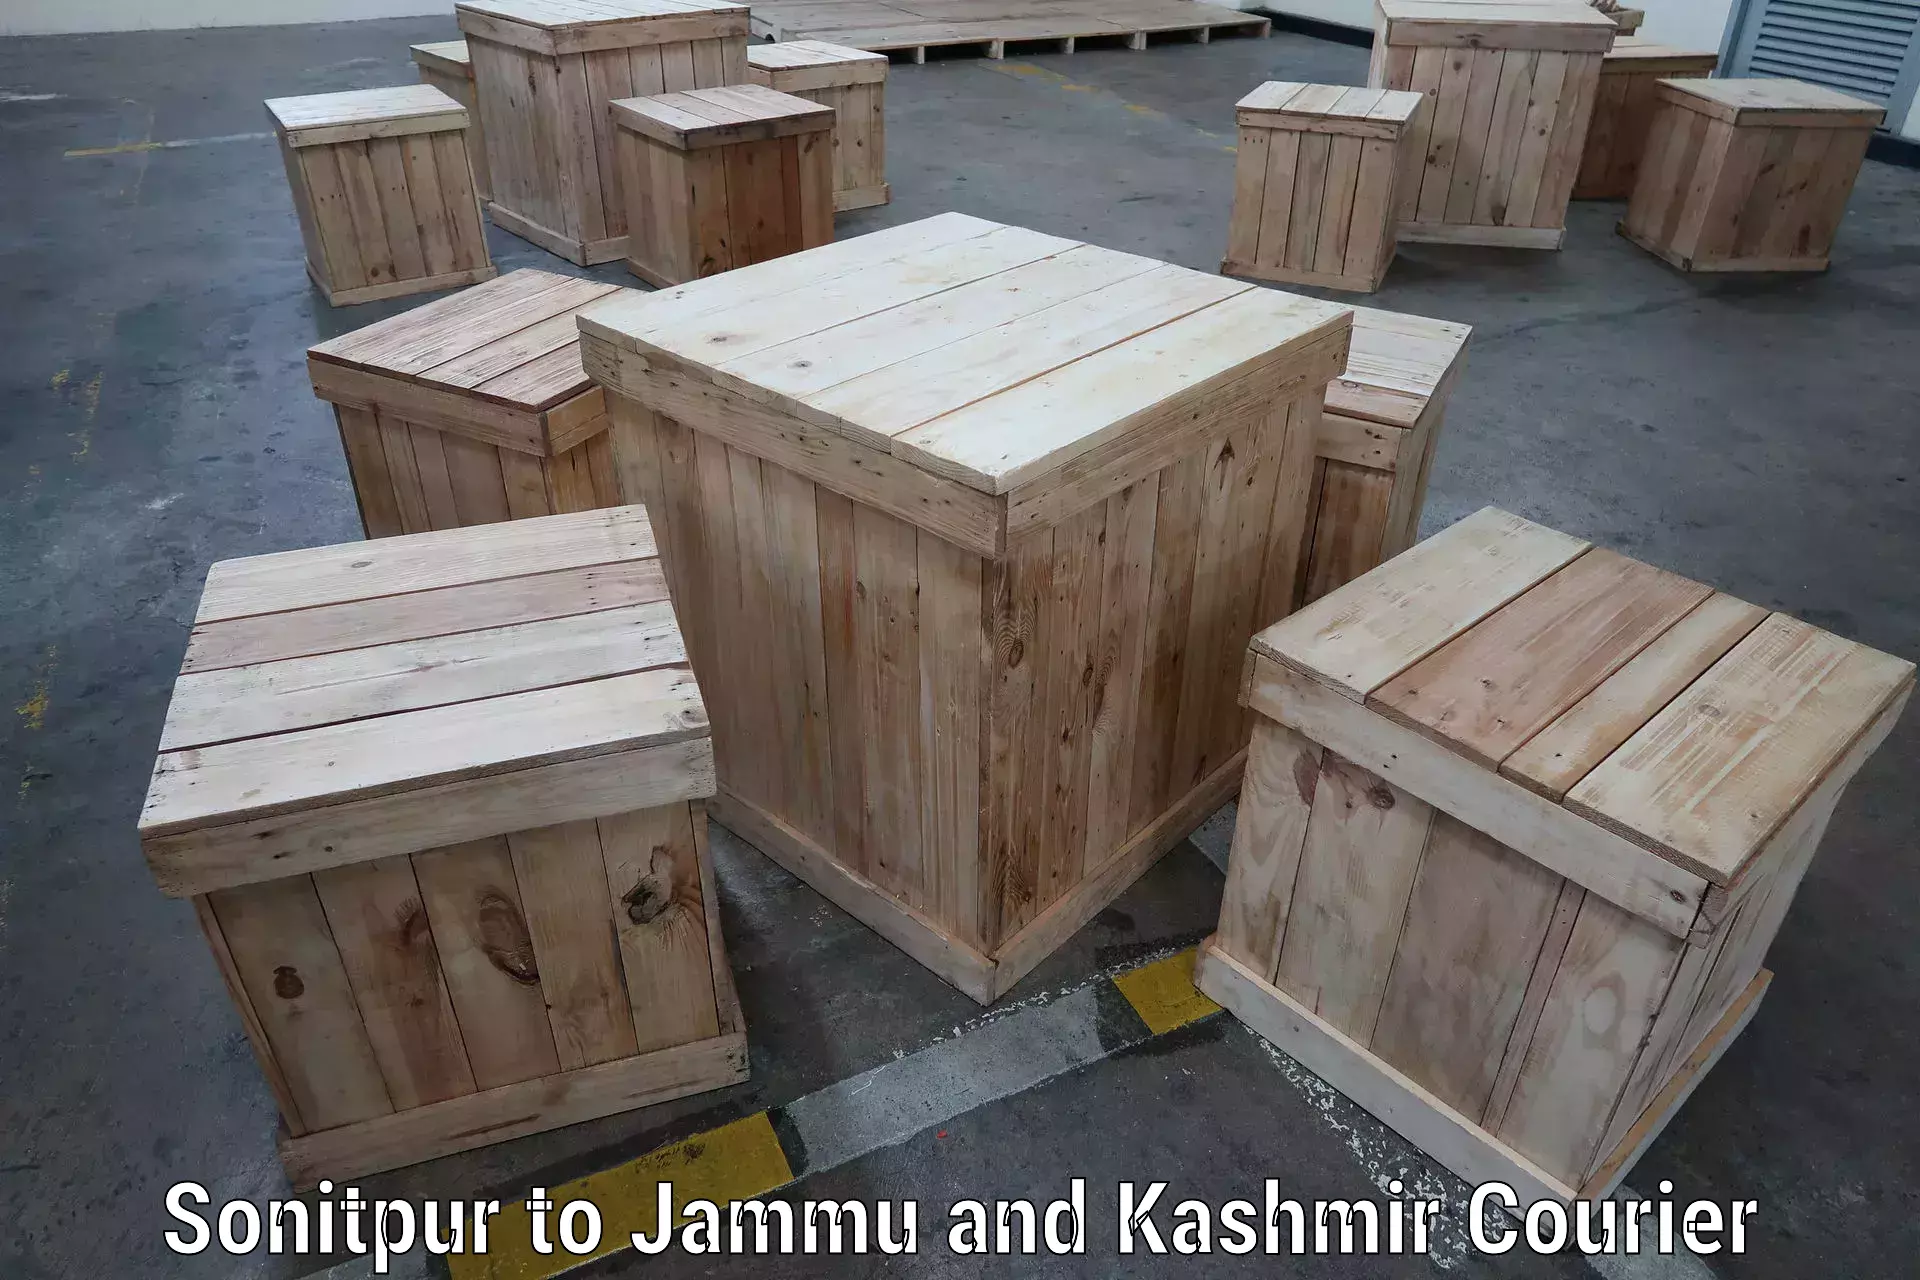 Nationwide shipping coverage Sonitpur to Jammu and Kashmir